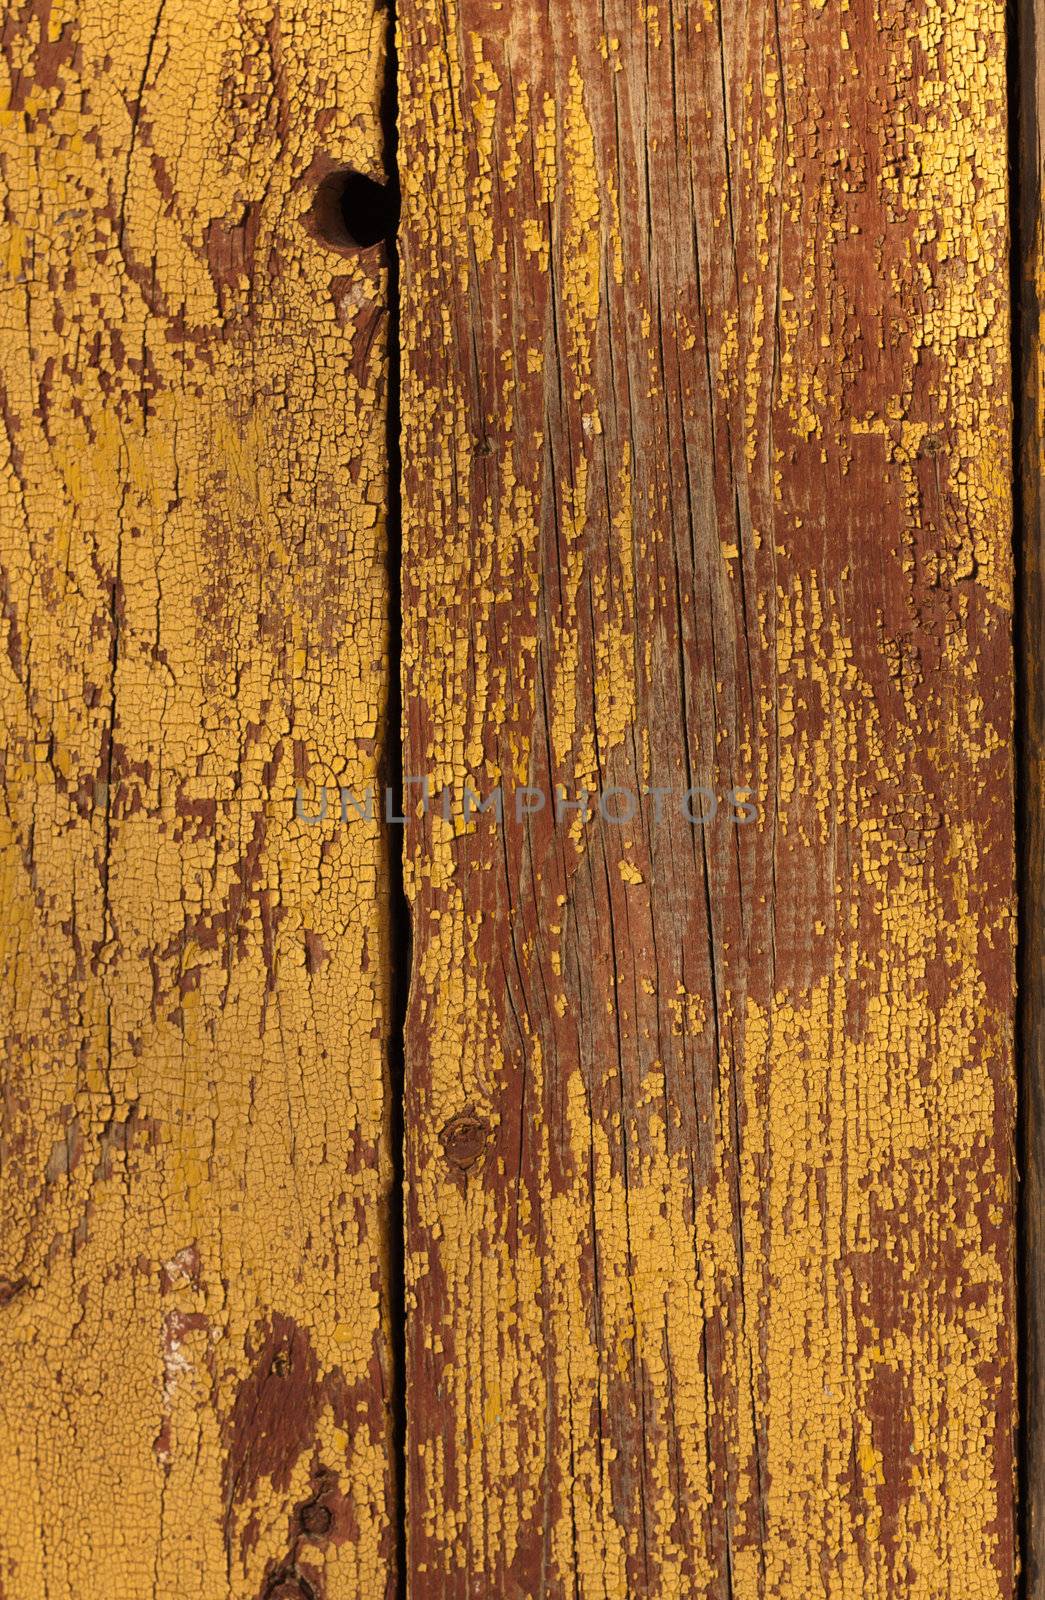 old wood texture (for background) 